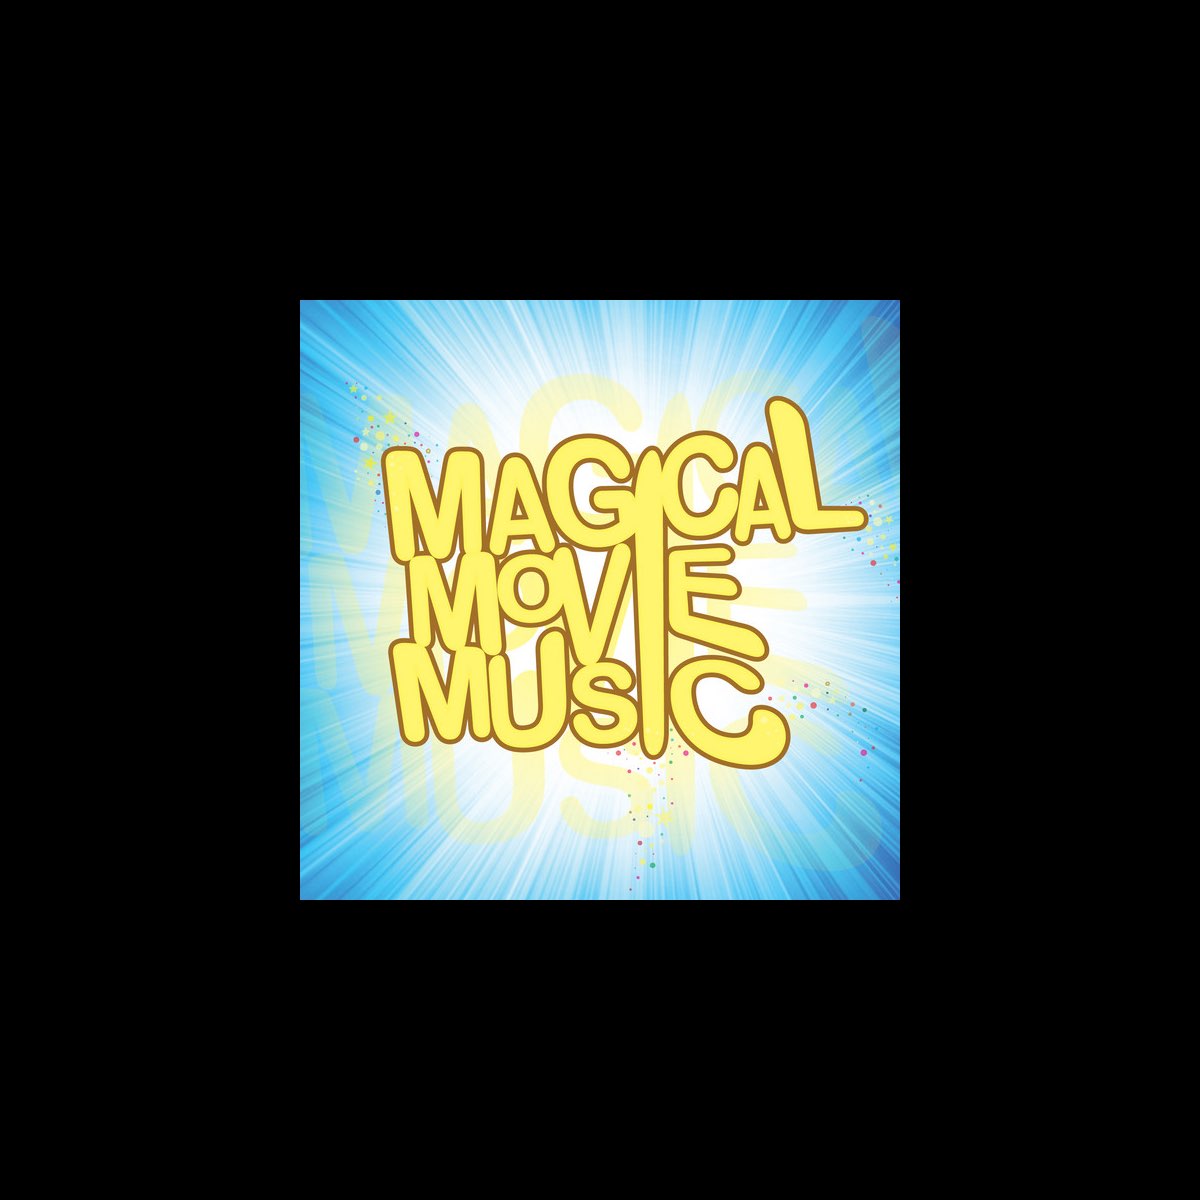 ‎Magical Movie Music by The London Pops Orchestra on Apple Music